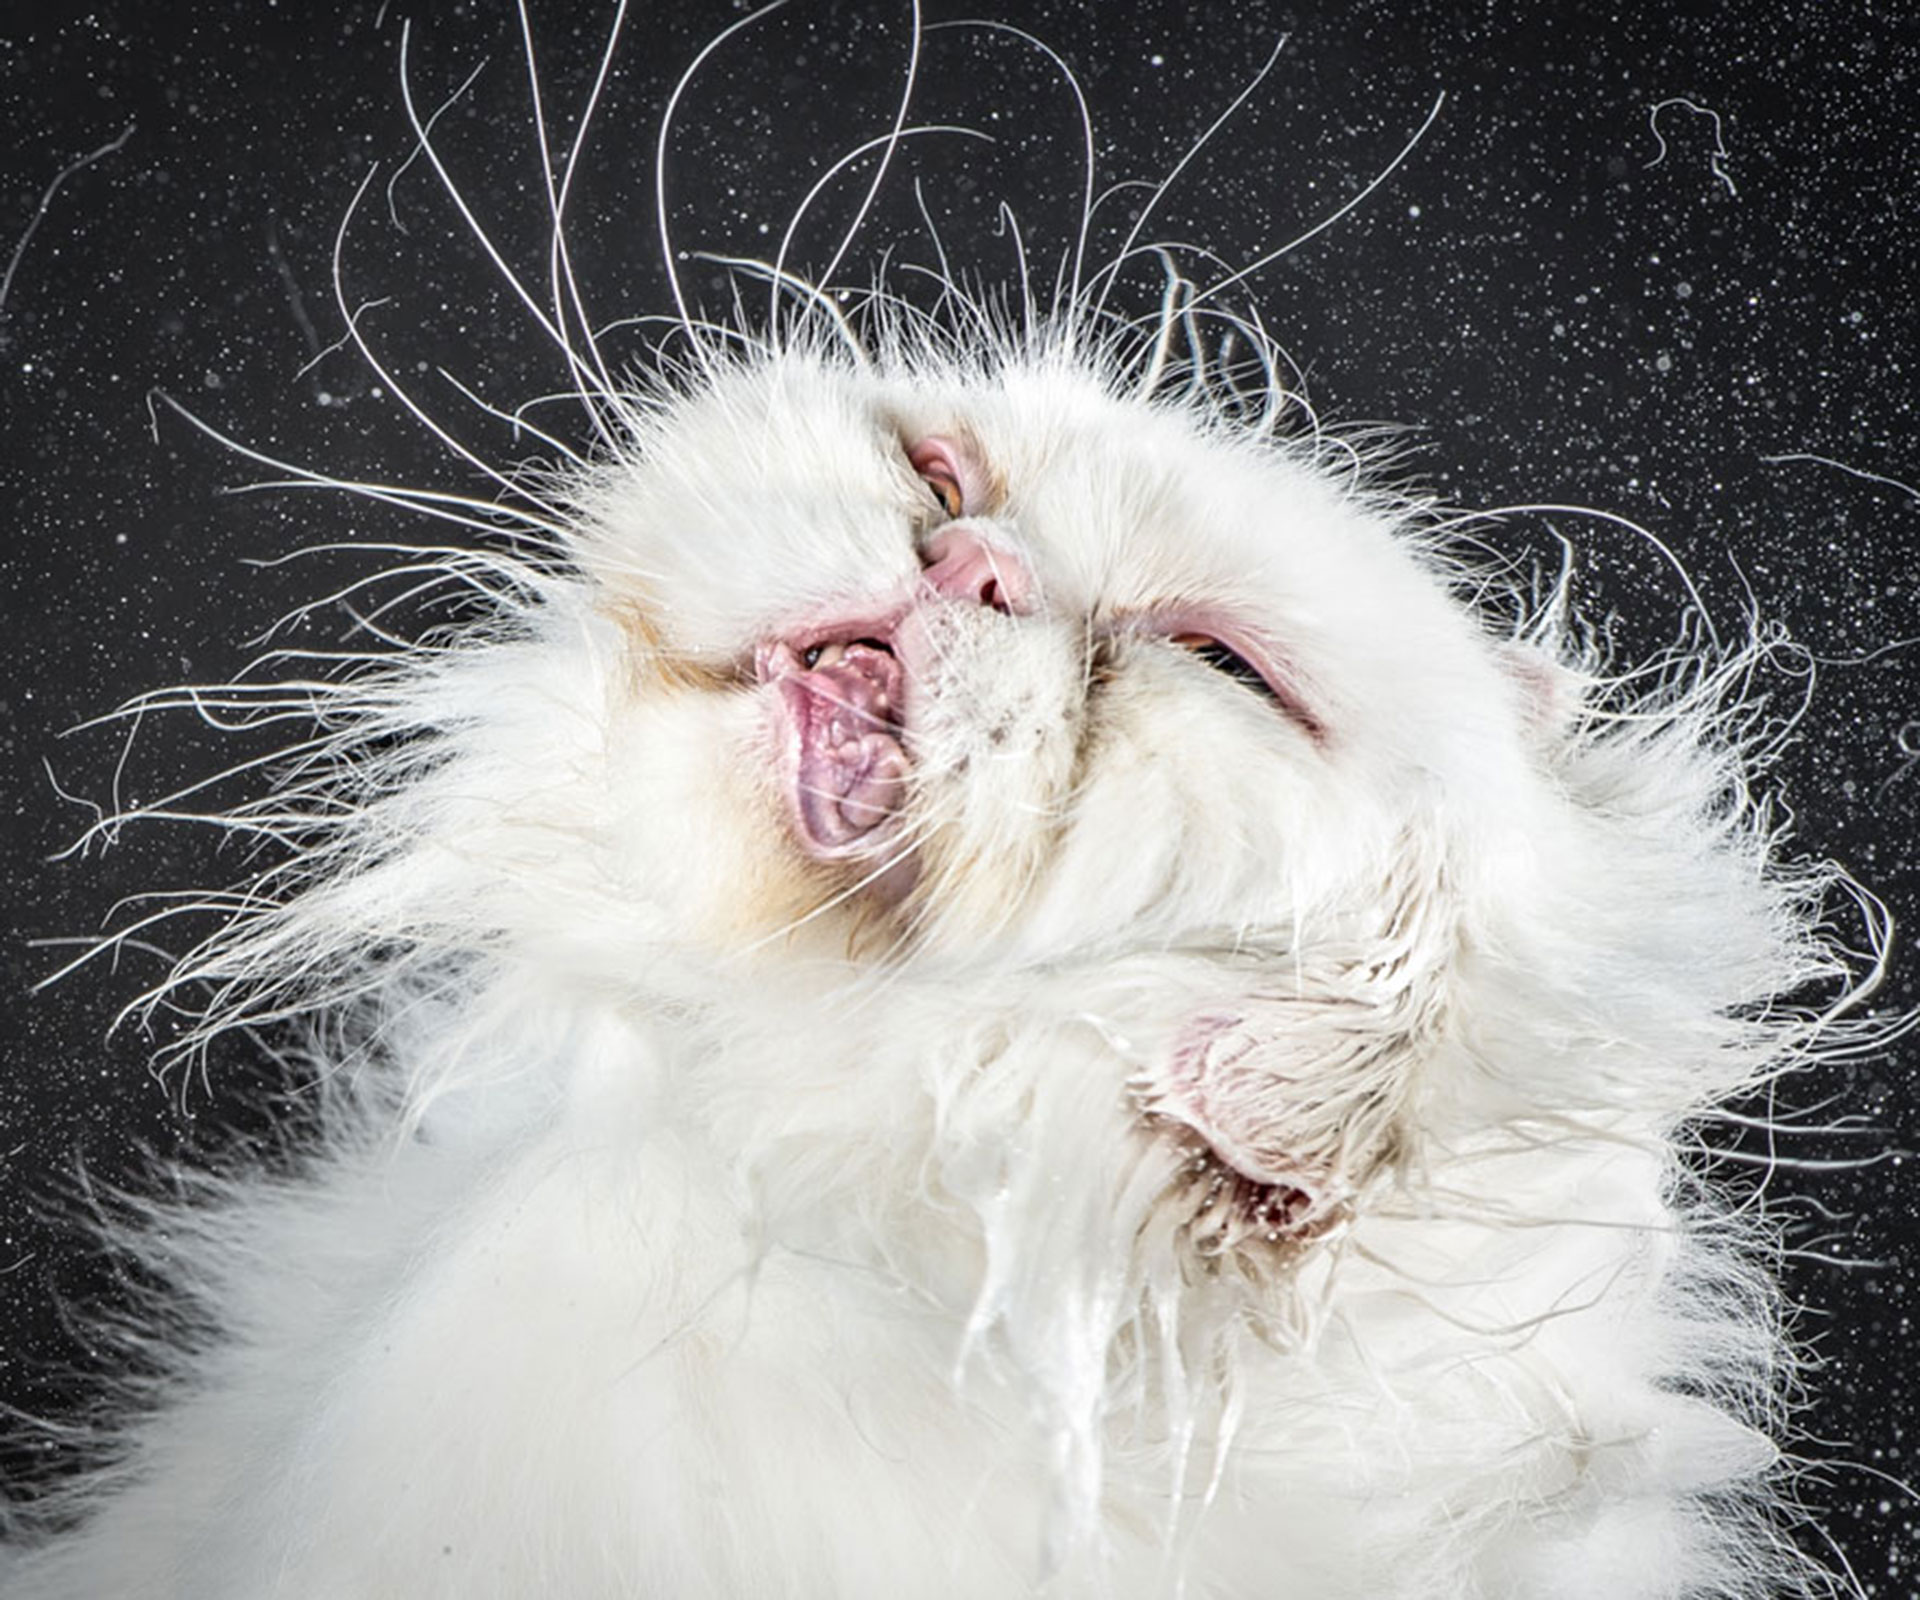 Hilarious images of cats shaking off water